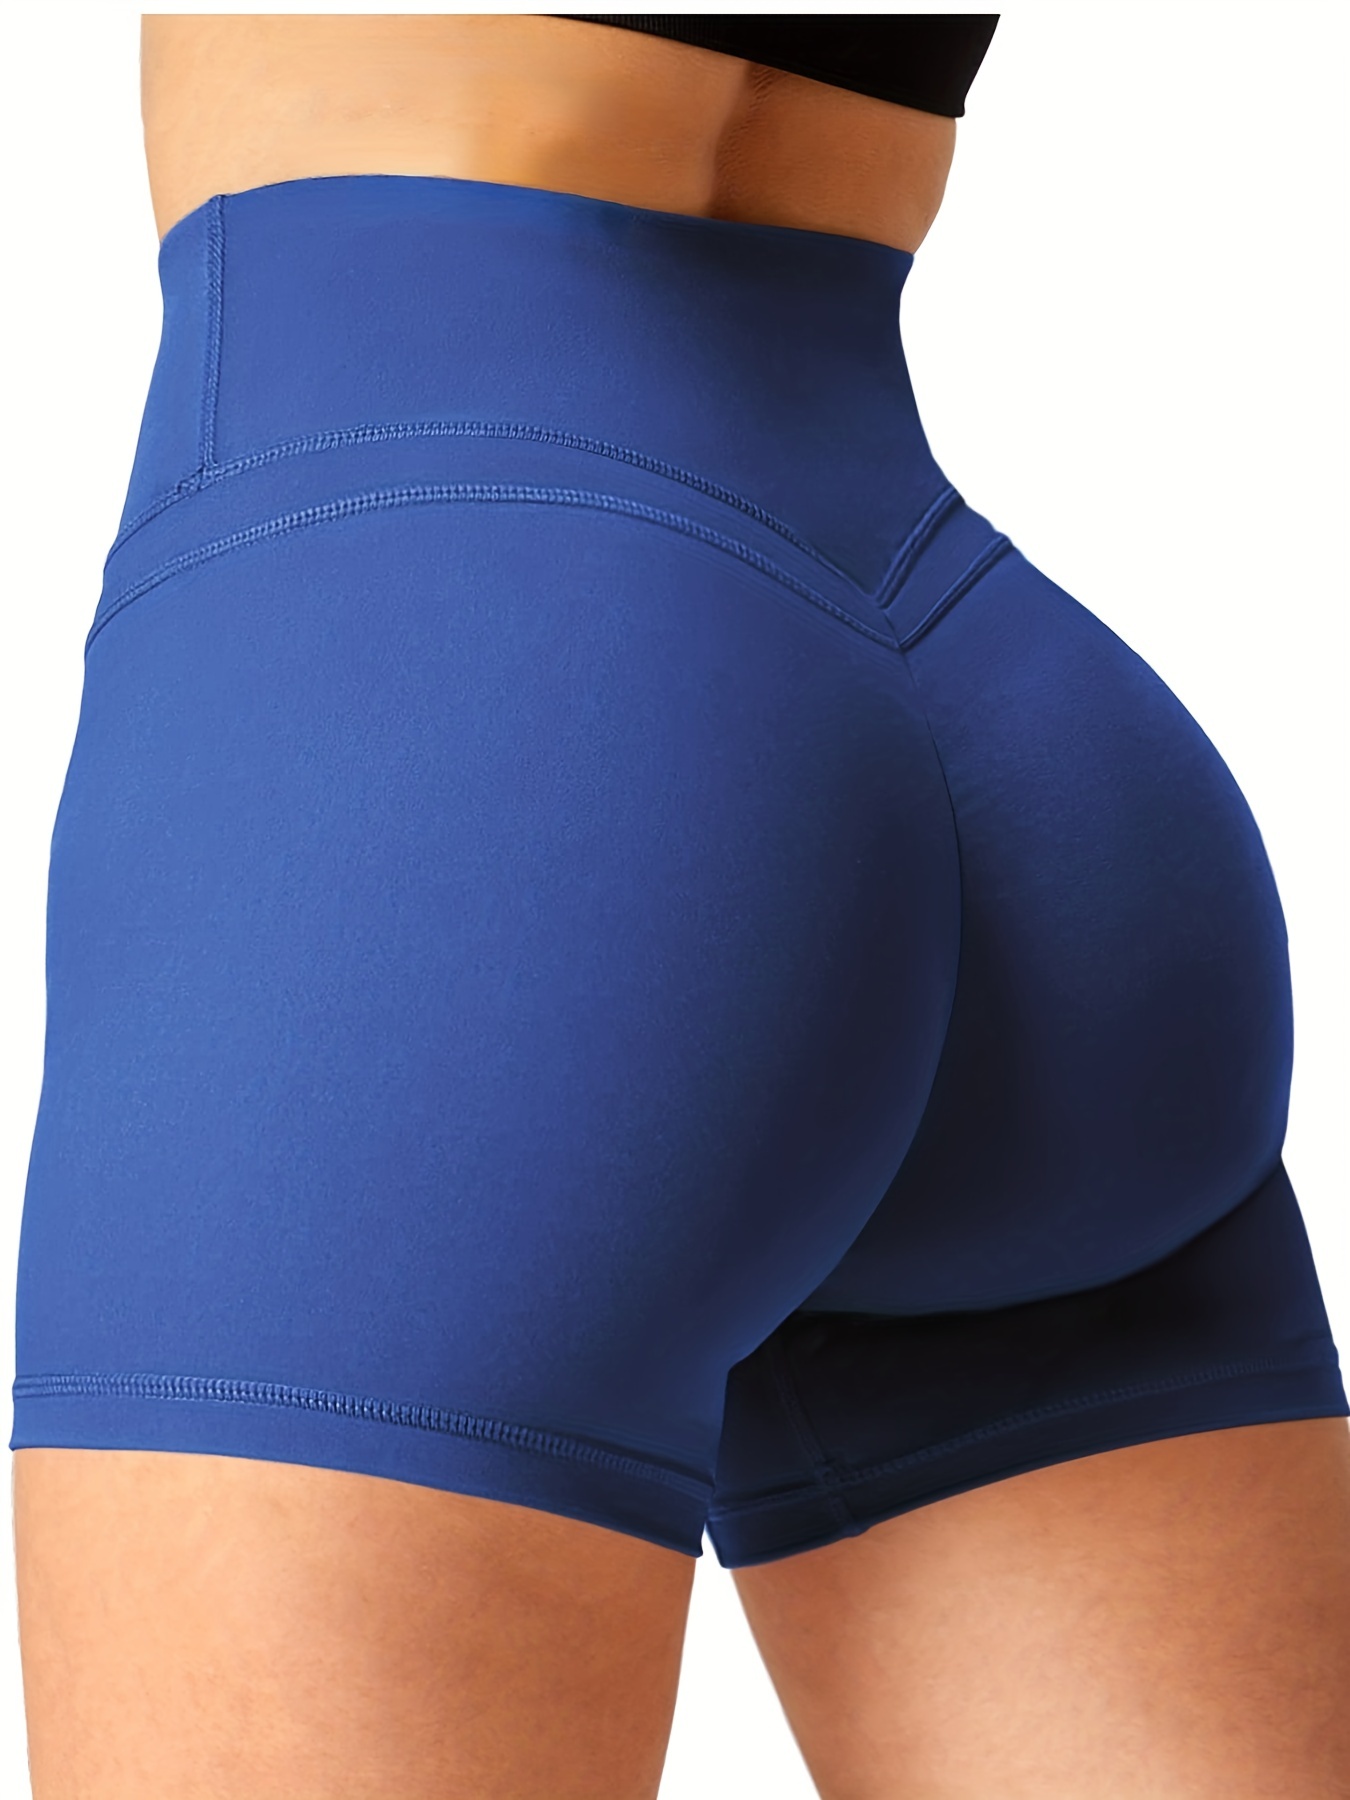 Women's Skimpy High Waist Seamless Tummy Control Booty Shorts for Women  Compression Shorts Lightweight Gym Outfits